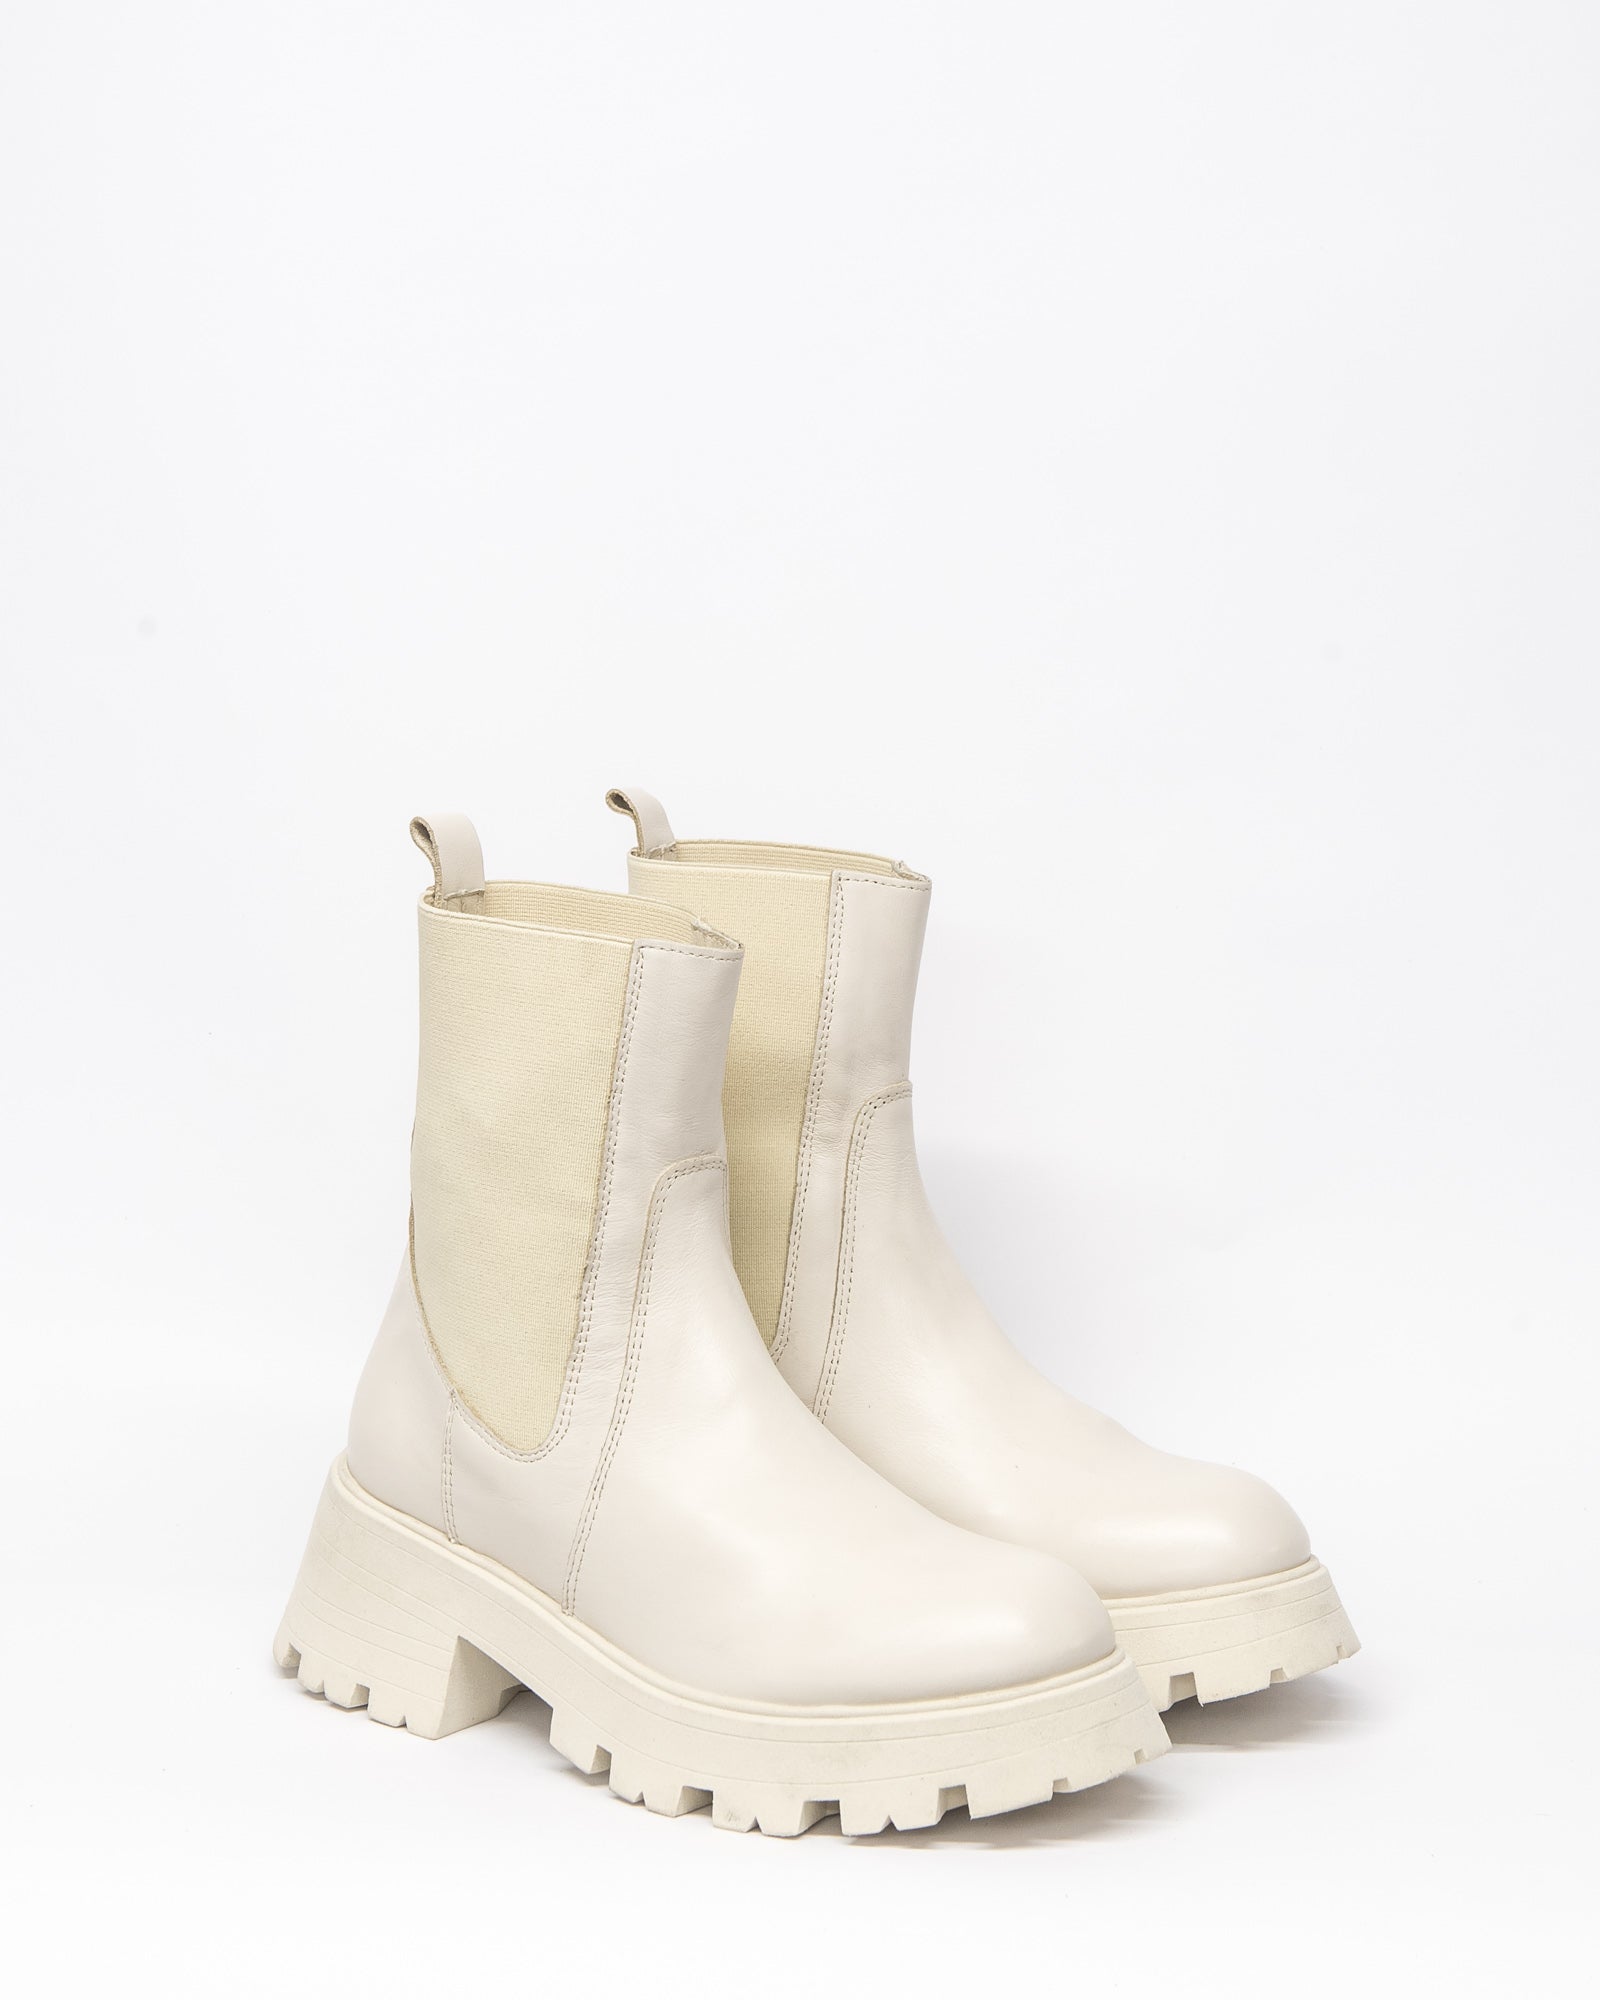 inset boot - beige leather